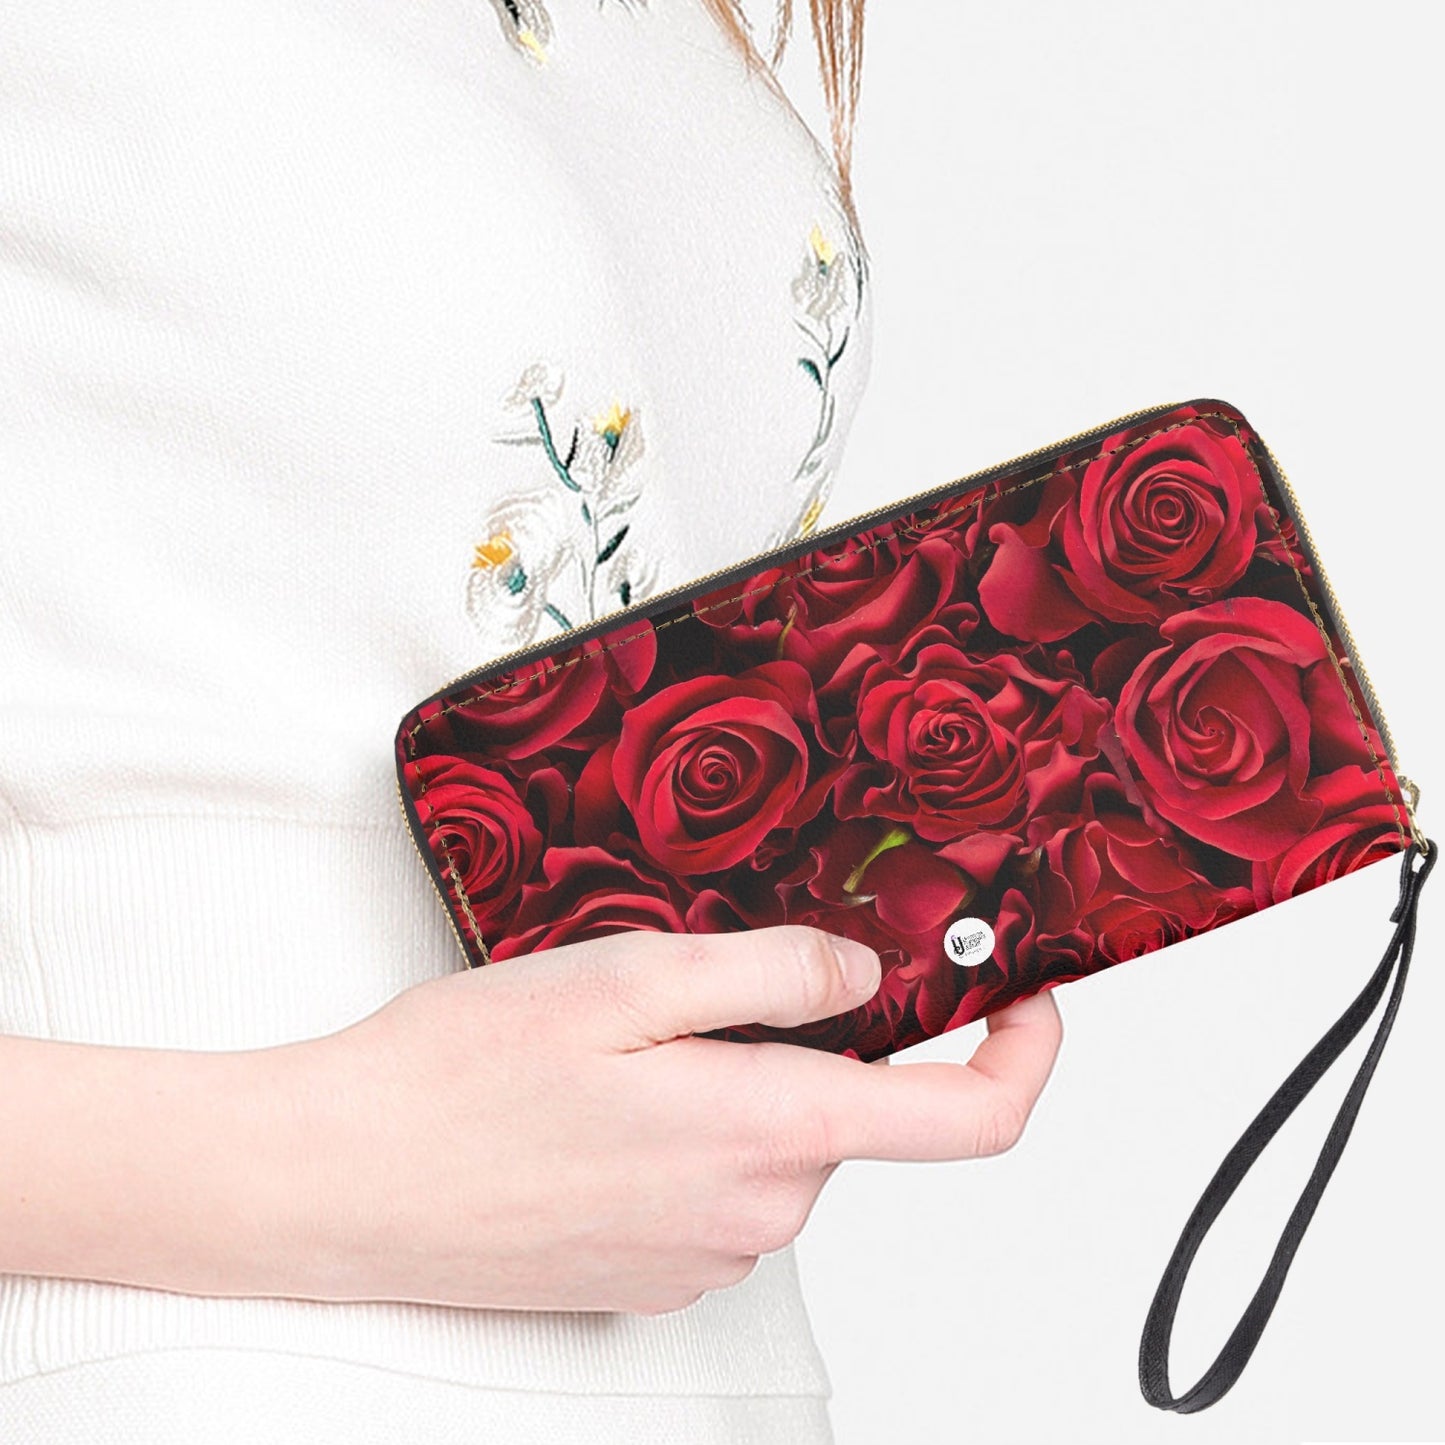 A PUG OF ROSES . PU Leather Wristlet Clutch Wallet